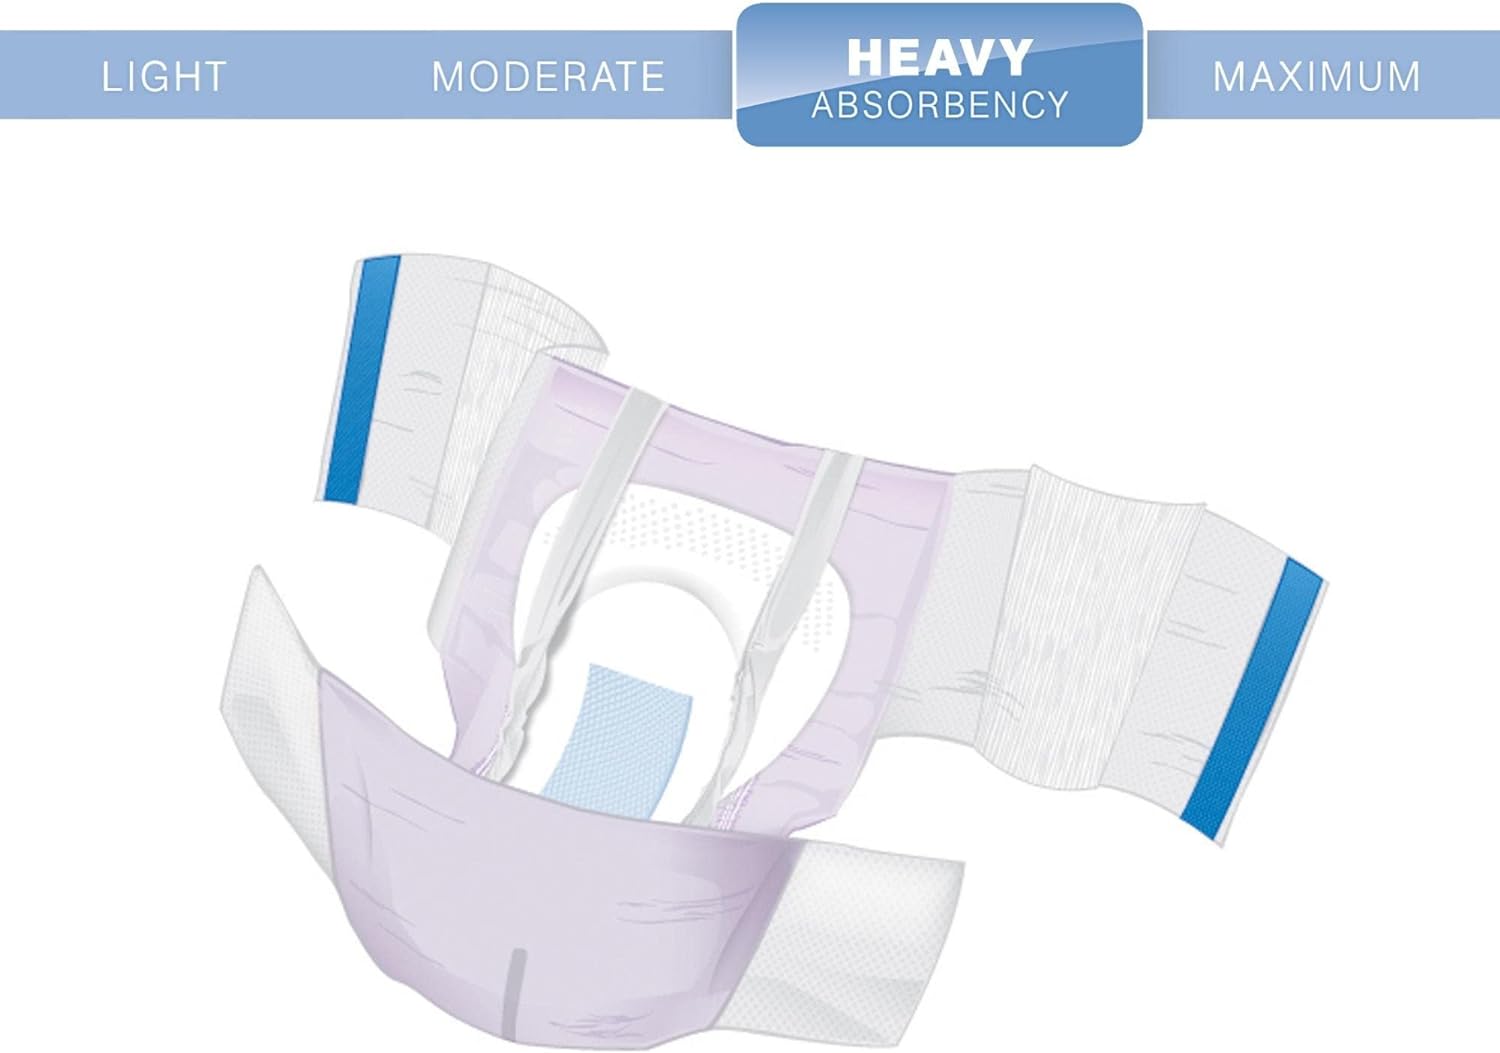 McKesson Ultra Plus Stretch Briefs, Incontinence, Heavy Absorbency, Medium, 20 Count, 1 Pack